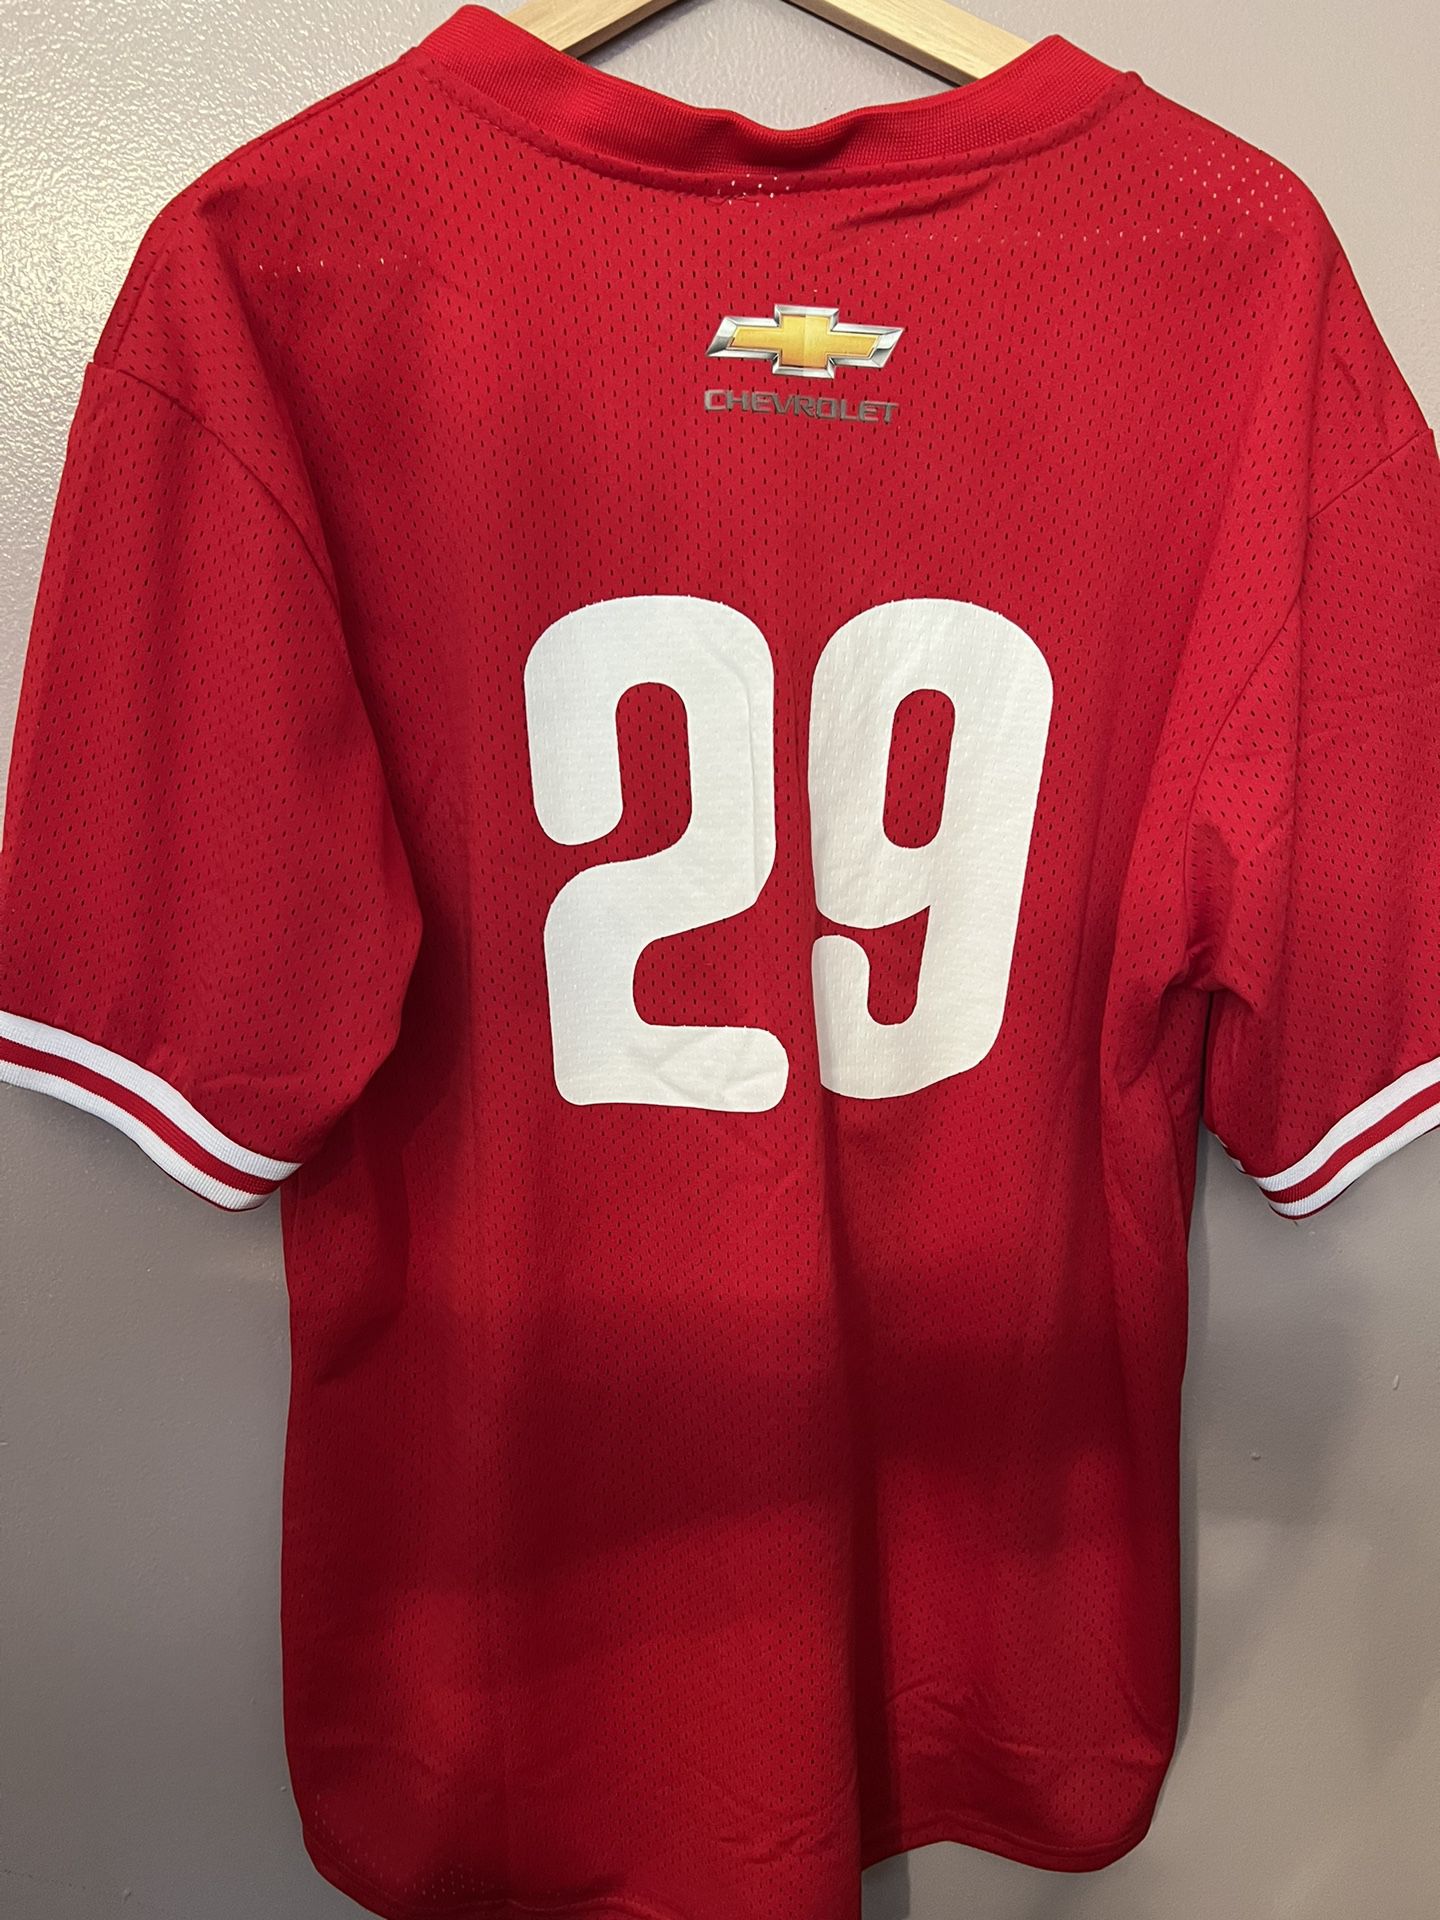 philadelphia phillies baseball jersey (size large) for Sale in Glendale, CA  - OfferUp